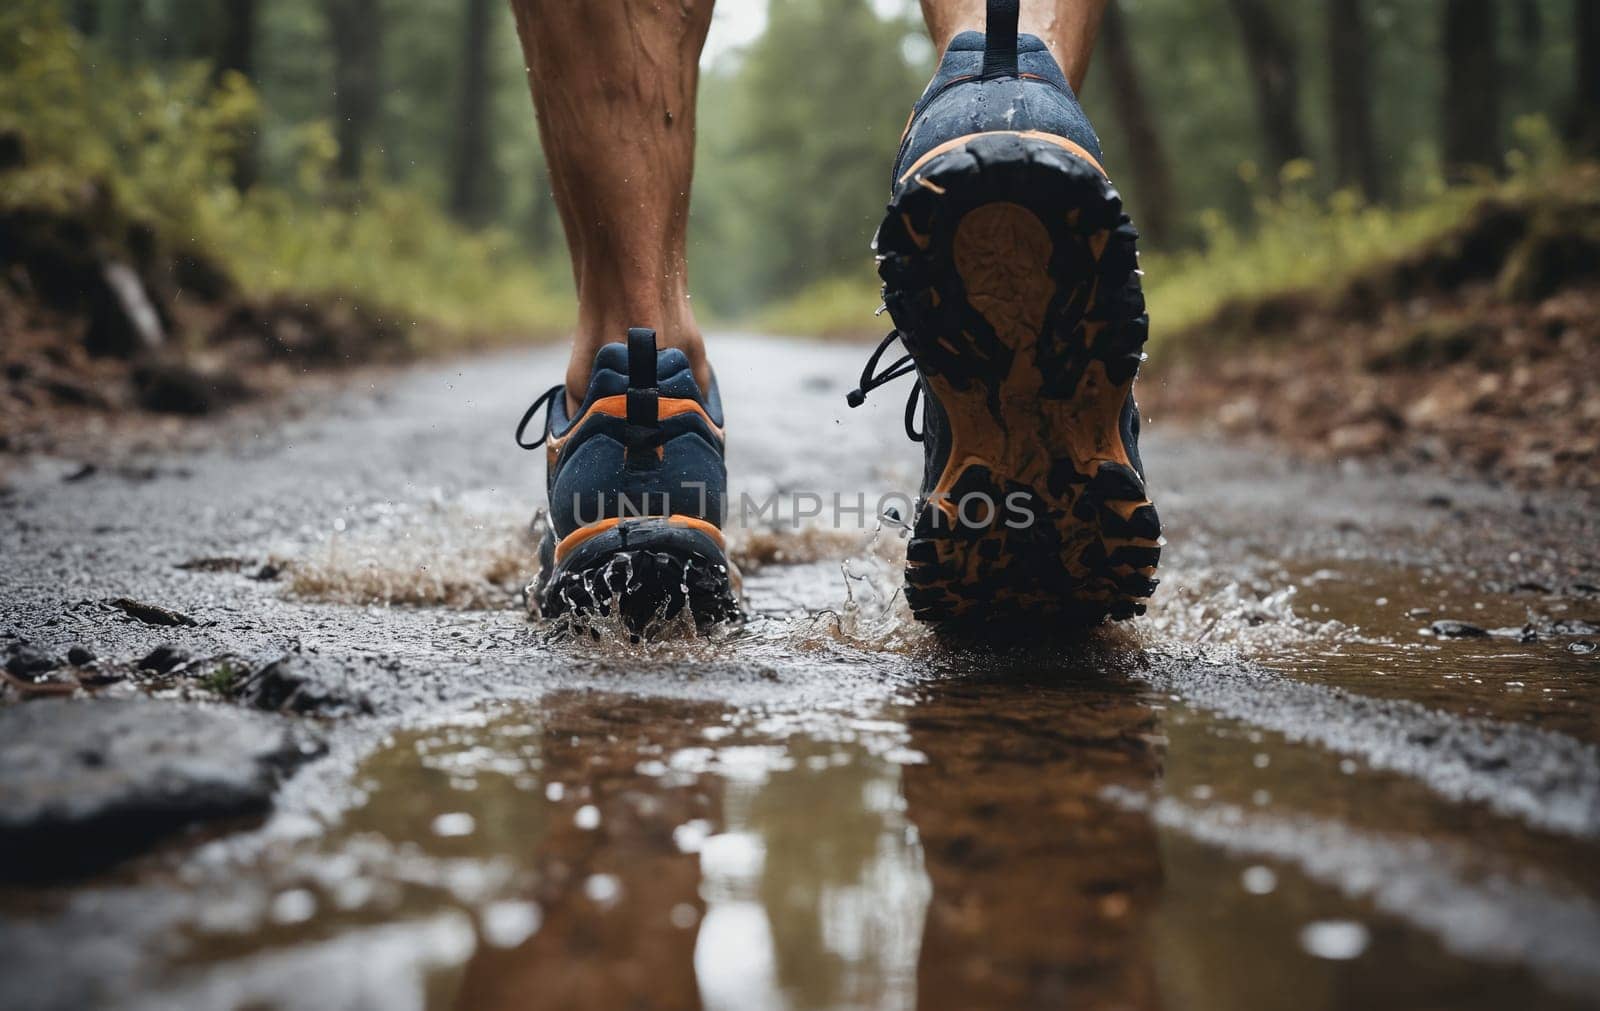 A persons leg in a hiking boot splashing through a water puddle on a trail by Andre1ns